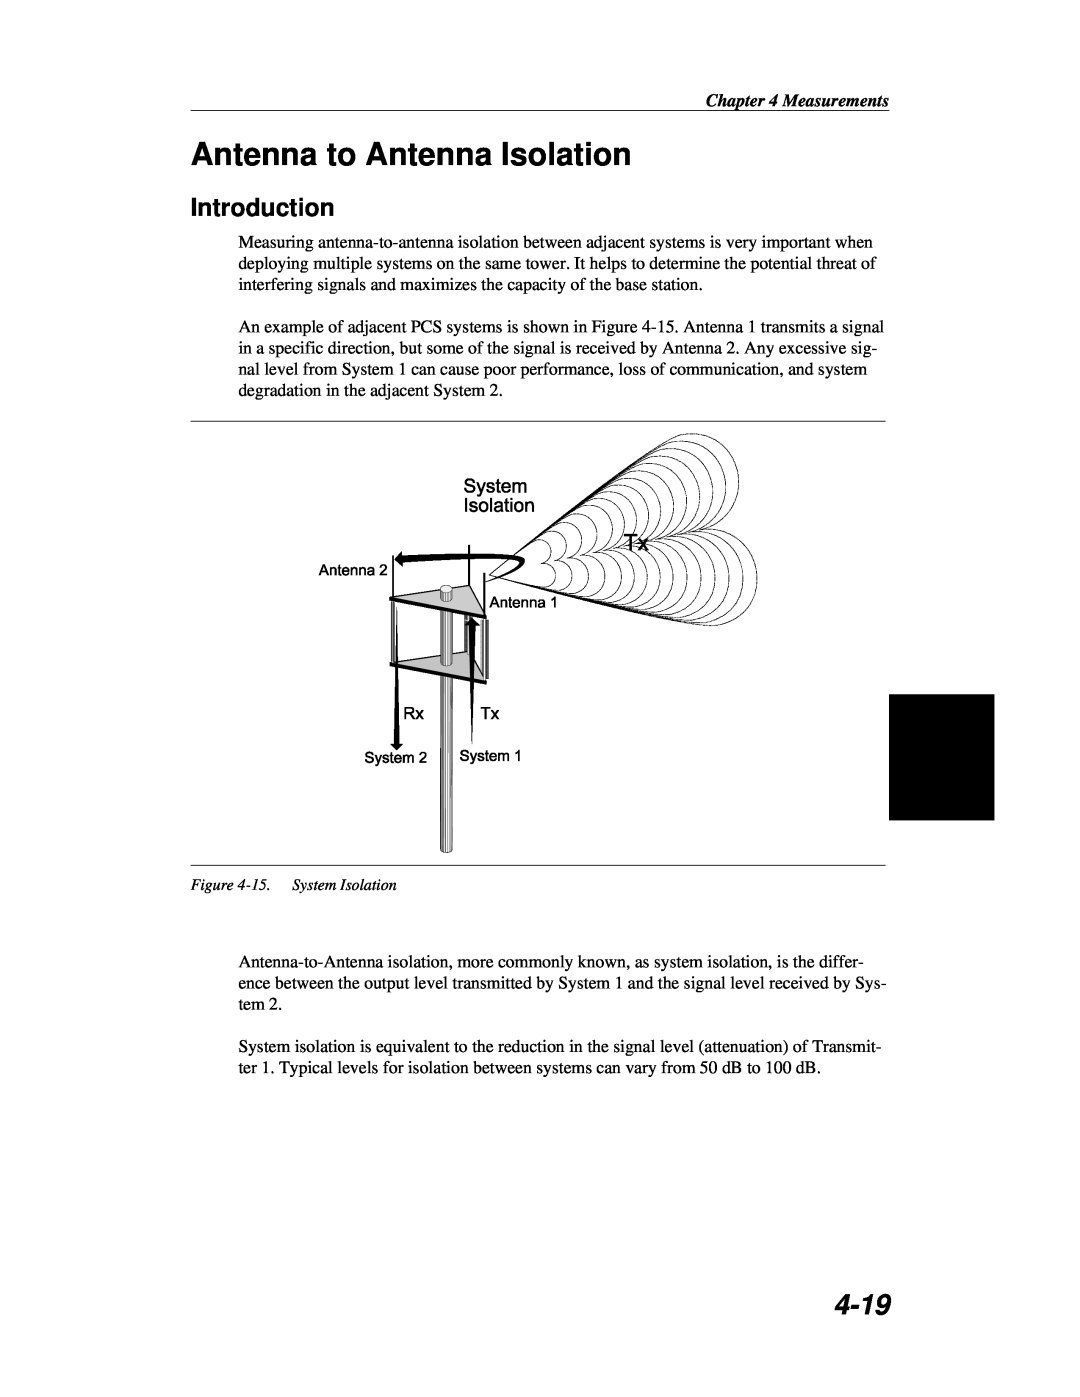 Anritsu S251C manual Antenna to Antenna Isolation, 4-19, Introduction, Measurements, 15.System Isolation 